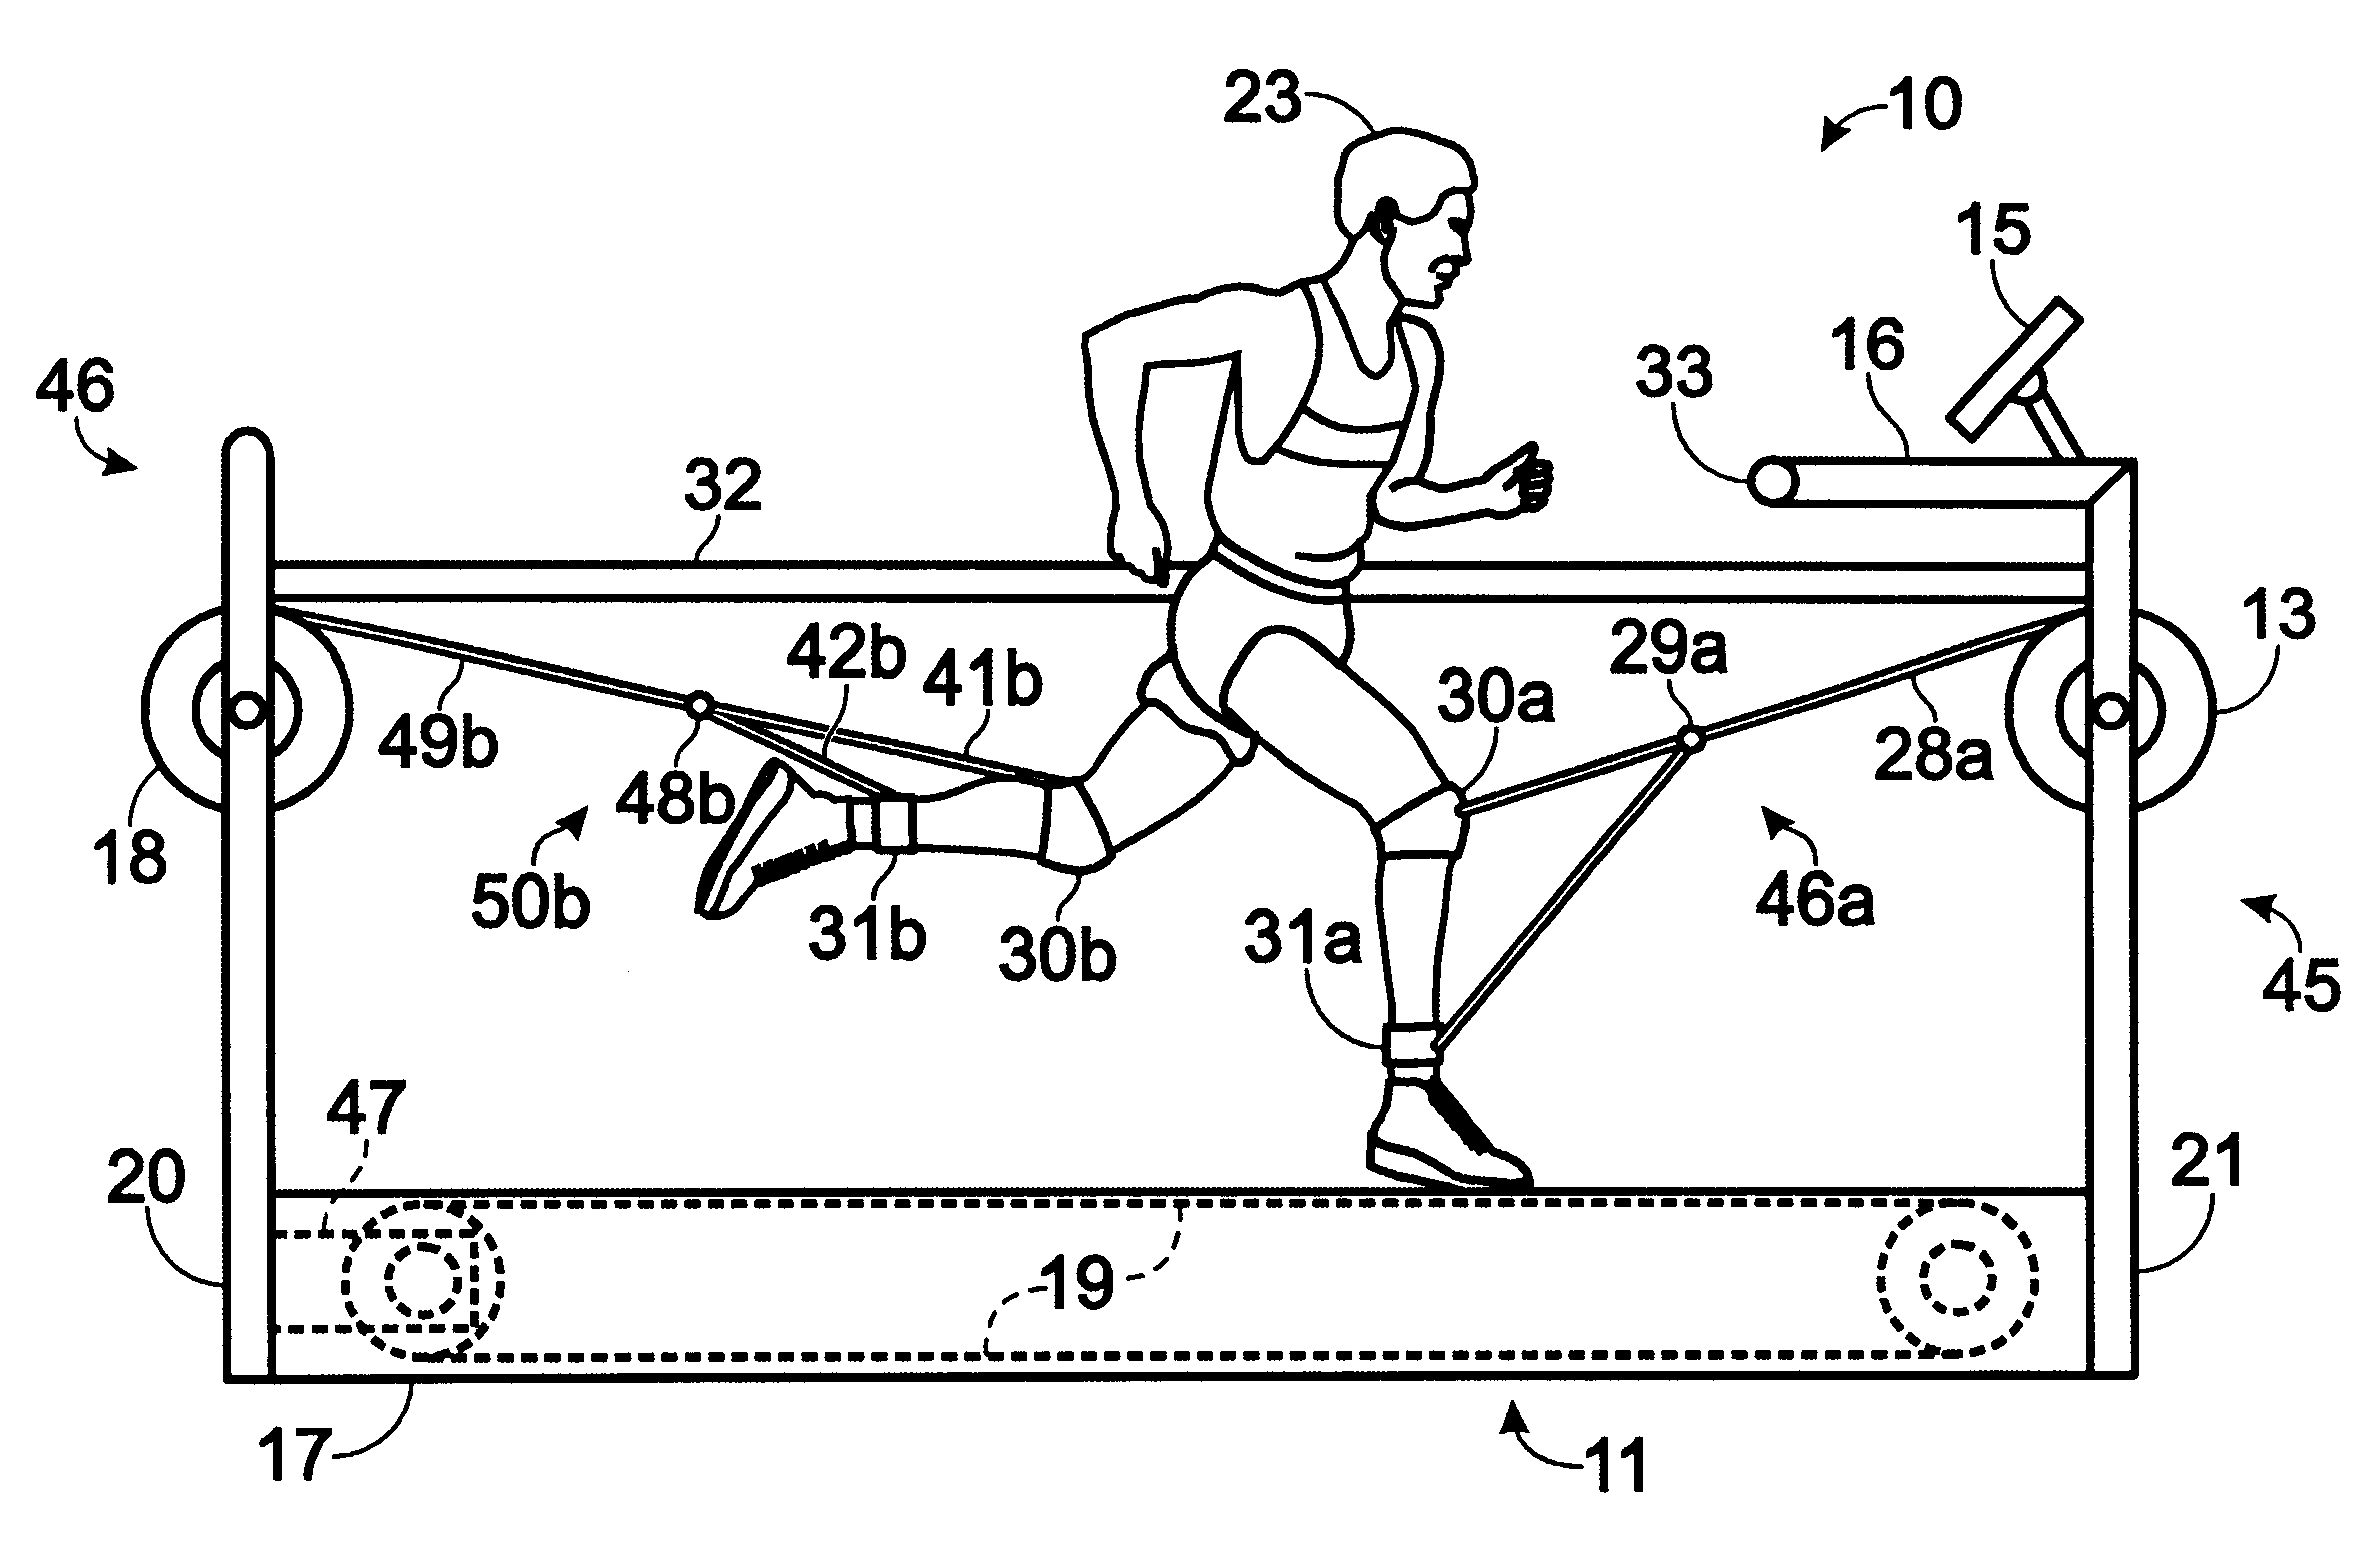 Apparatus using multi-directional resistance in exercise equipment